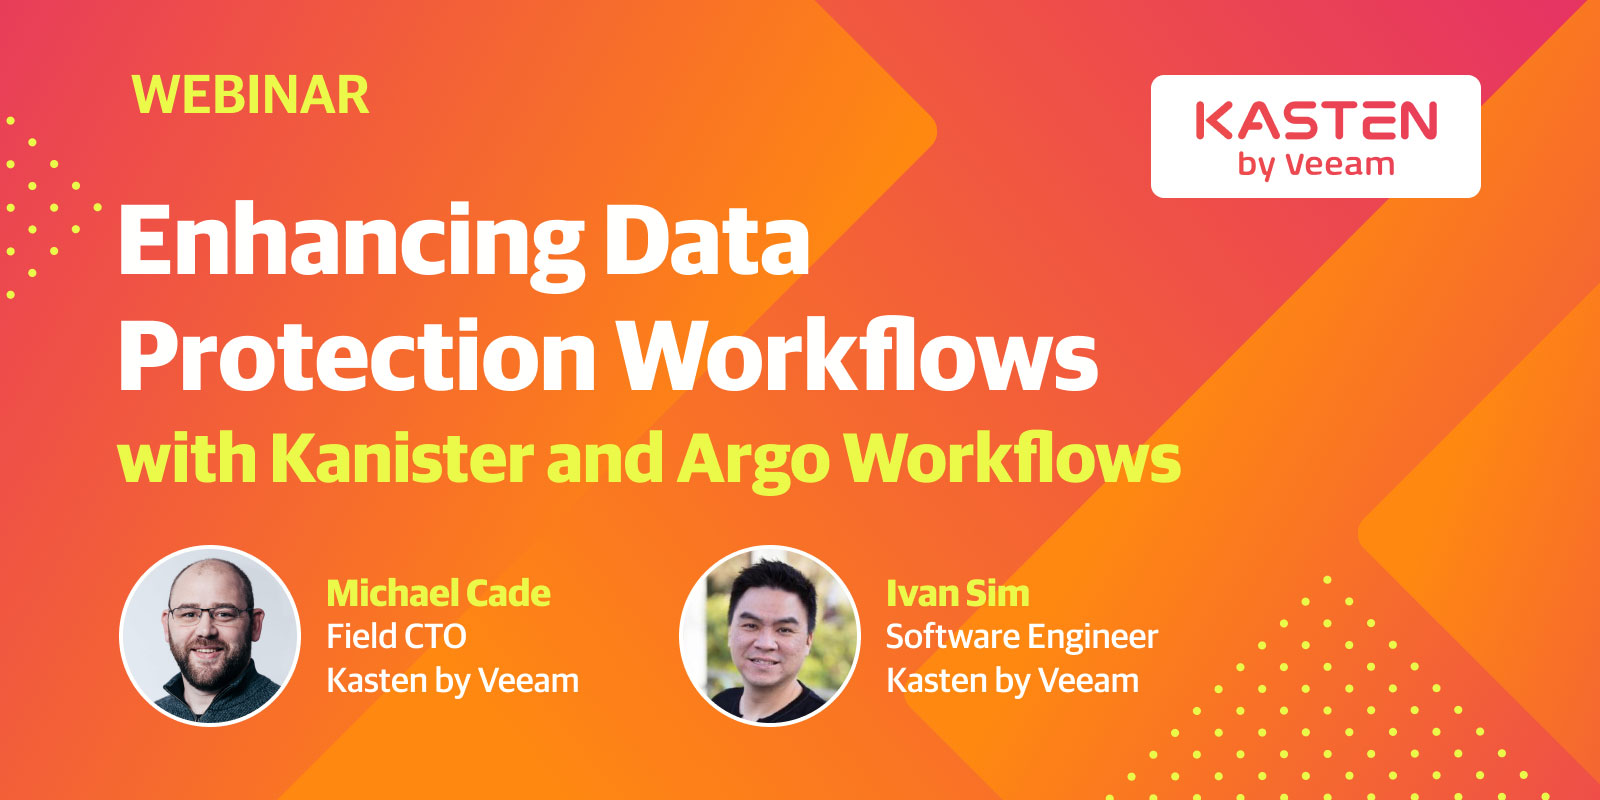 Enhancing-data-protection-workflows-with-Kanister-and-Argo-workflows